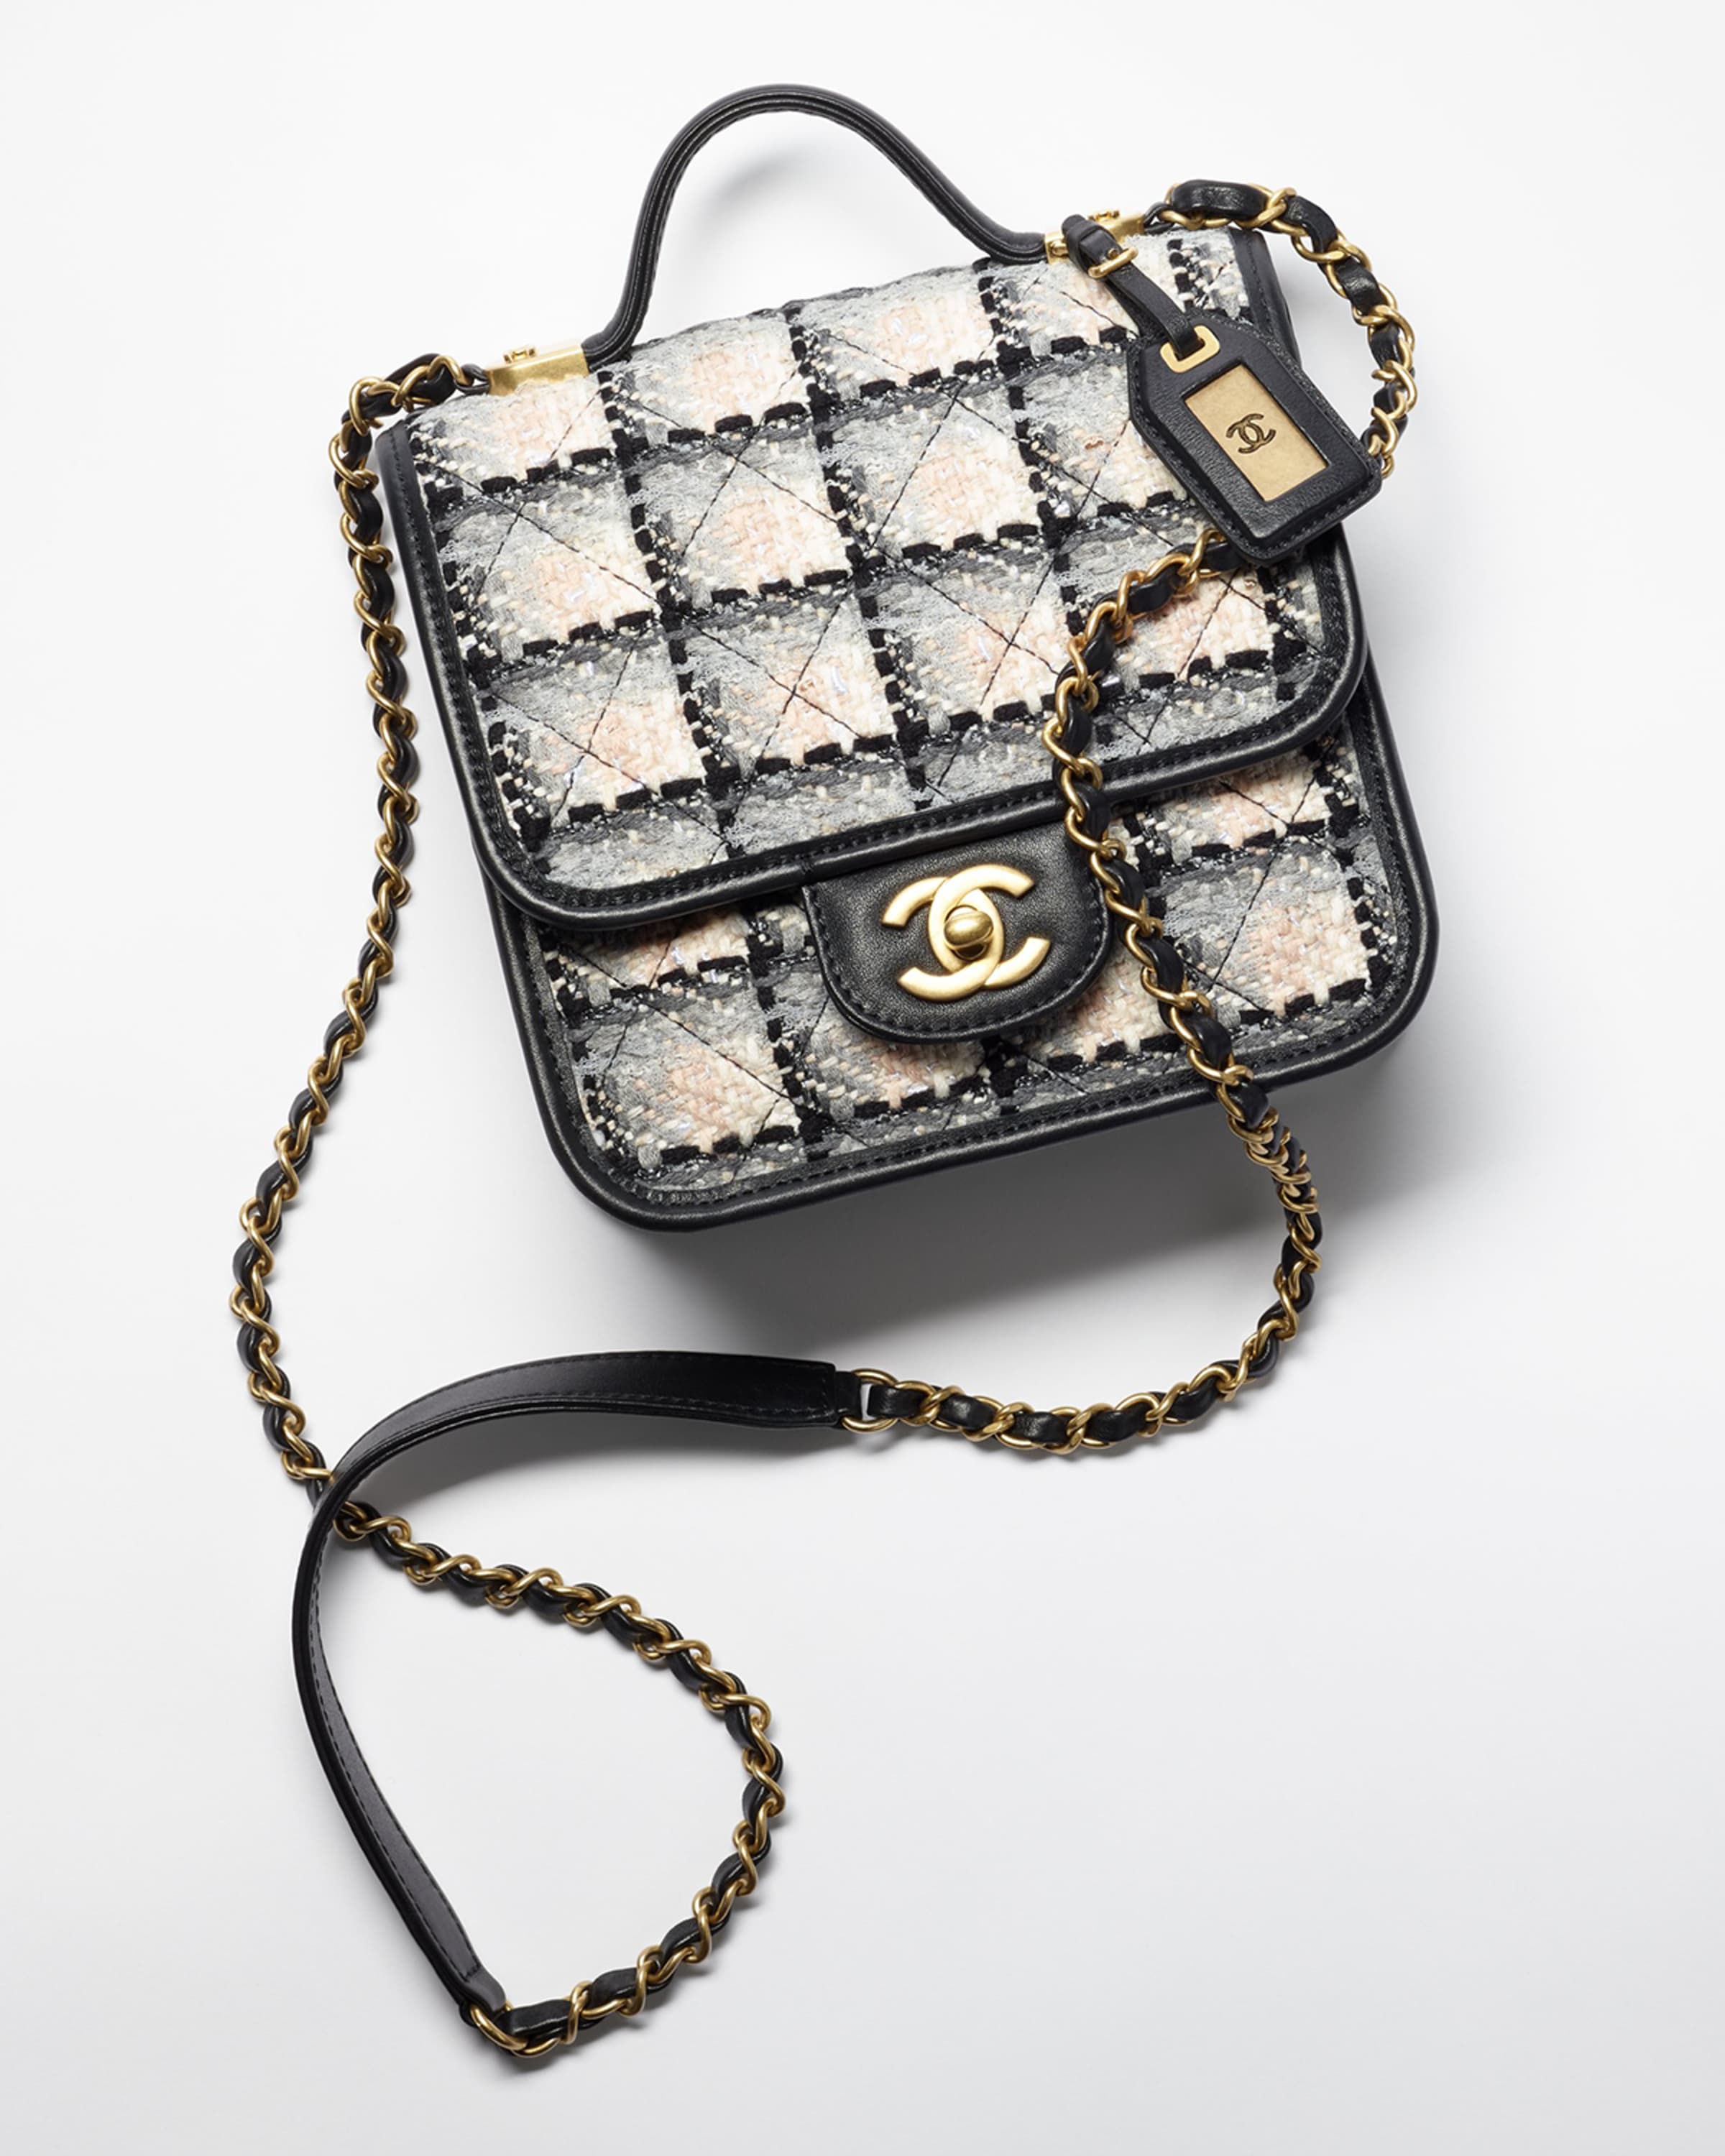 CHANEL SMALL FLAP BAG WITH TOP HANDLE | Neiman Marcus